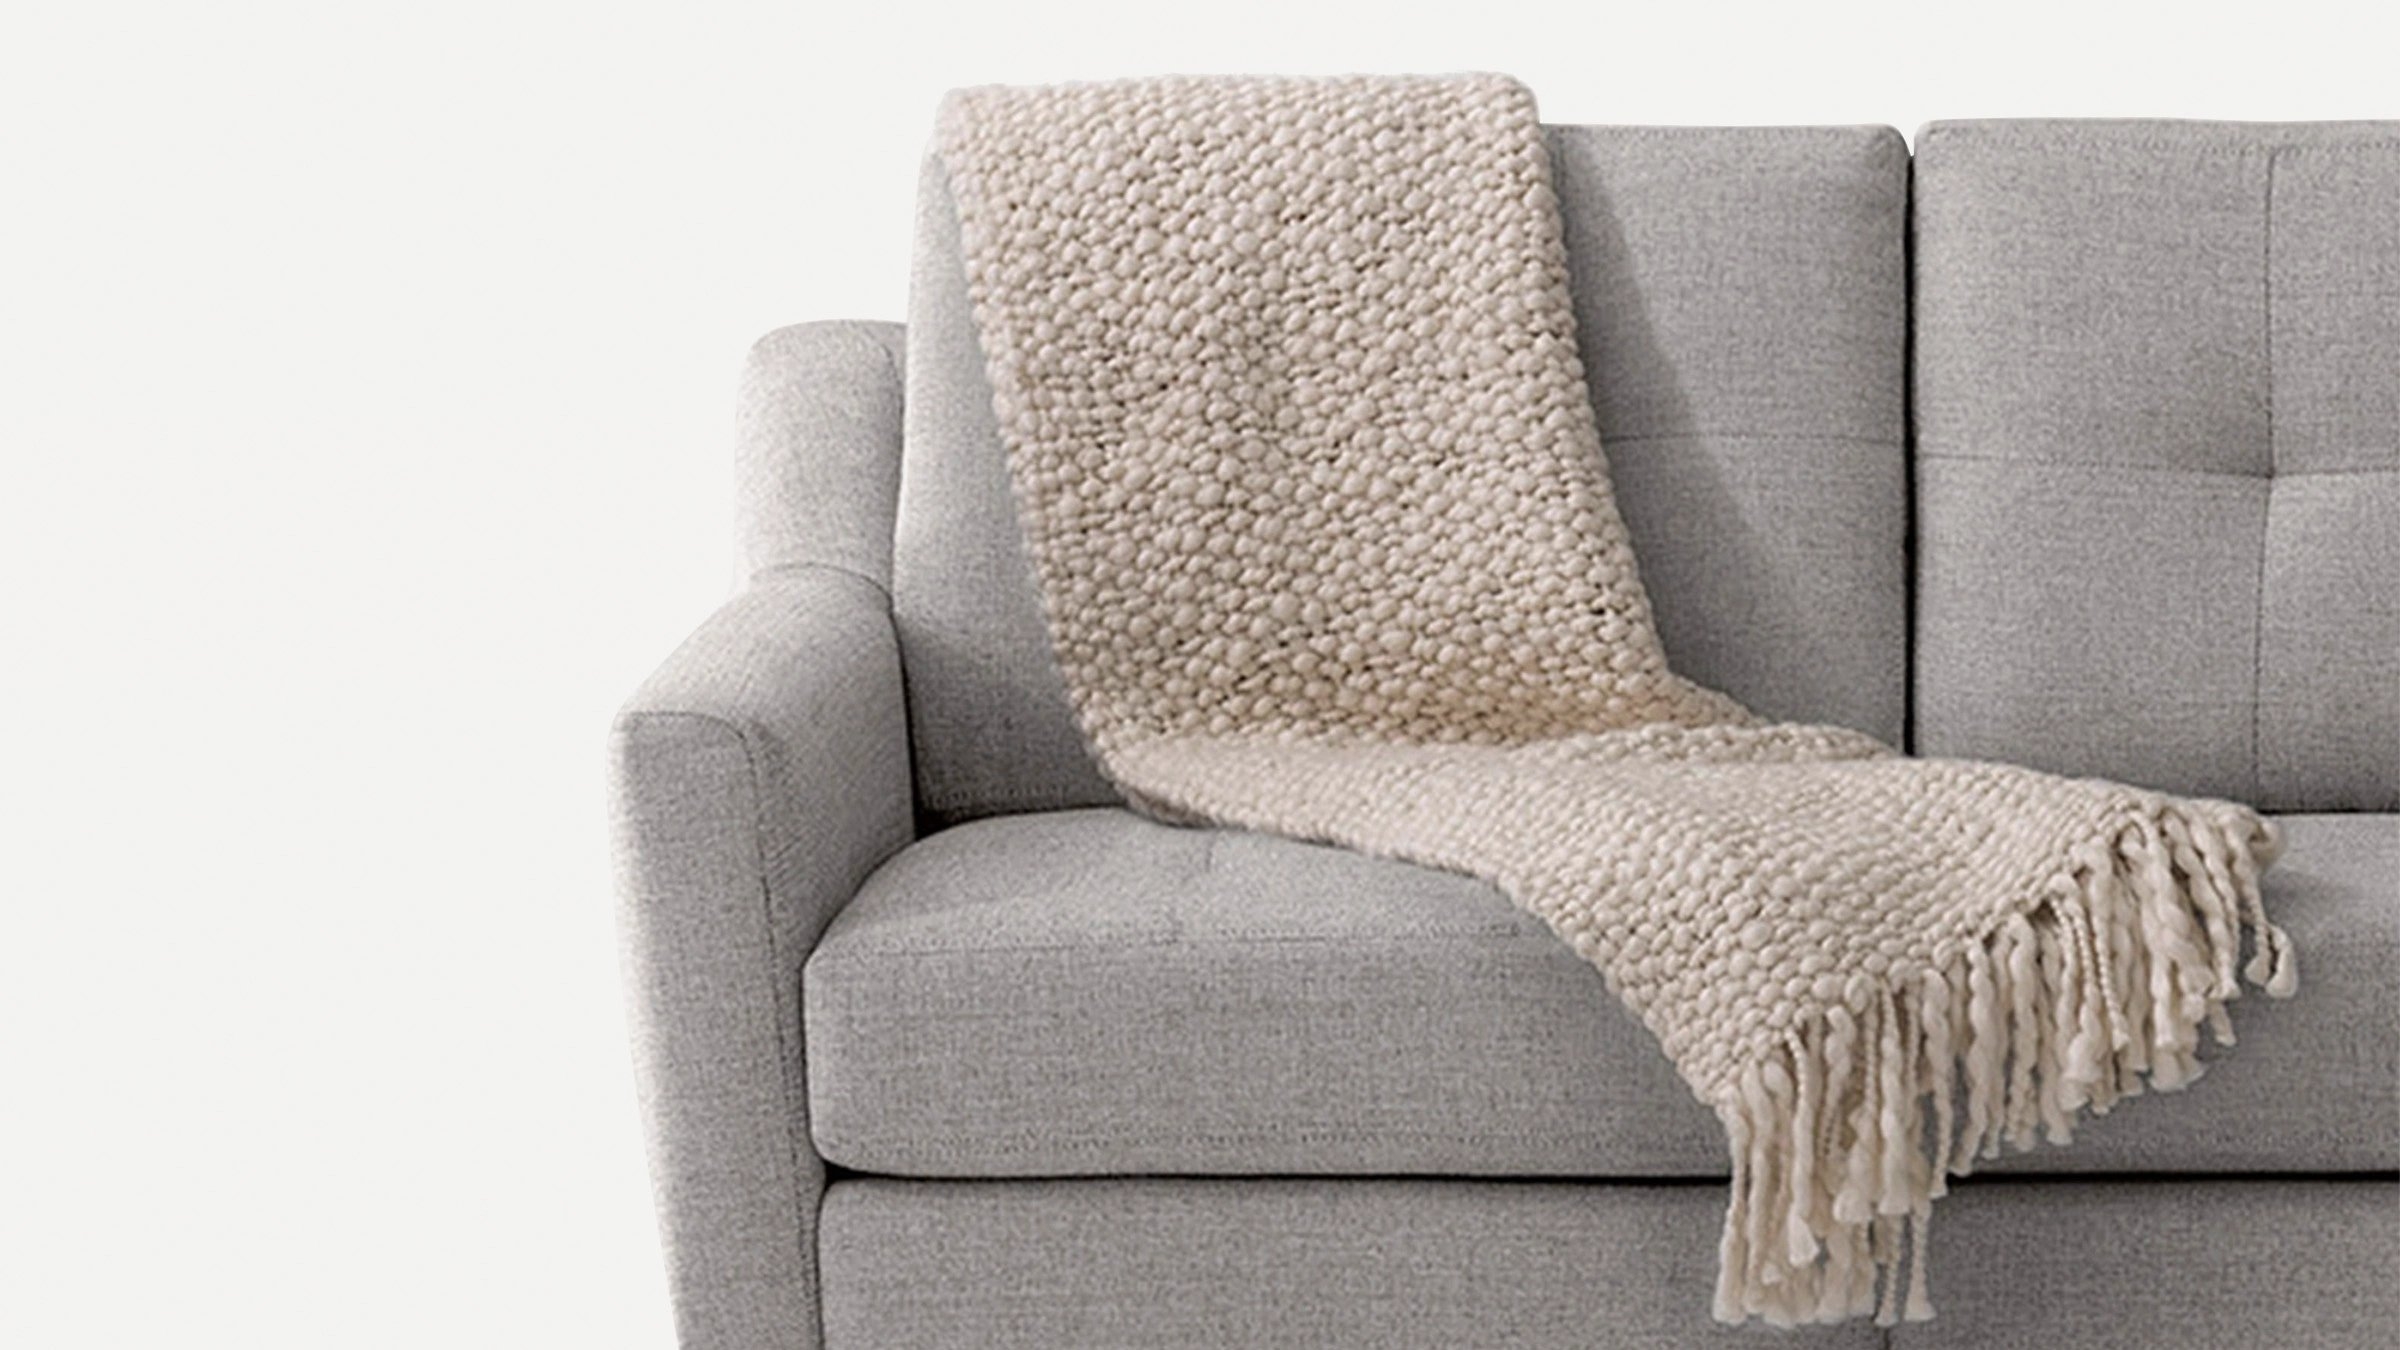 The Ivory Essential Hand-Woven Throw Blanket Blanket in Mixed - Image 3